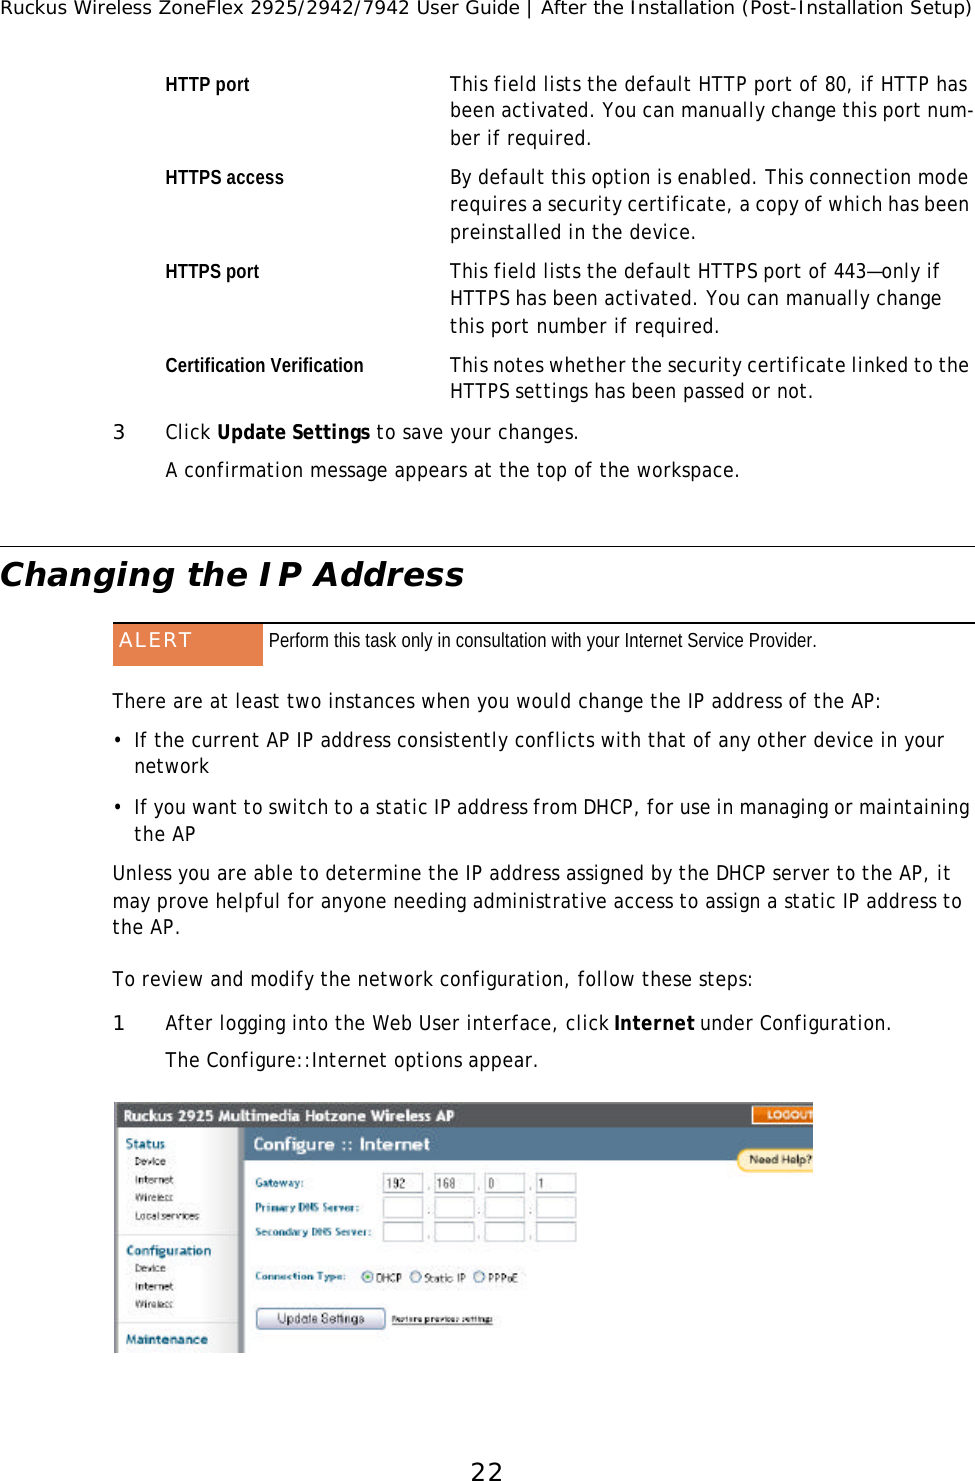 Ruckus Wireless ZoneFlex 2925/2942/7942 User Guide | After the Installation (Post-Installation Setup)22HTTP port This field lists the default HTTP port of 80, if HTTP has been activated. You can manually change this port num-ber if required.HTTPS access By default this option is enabled. This connection mode requires a security certificate, a copy of which has been preinstalled in the device.HTTPS port This field lists the default HTTPS port of 443—only if HTTPS has been activated. You can manually change this port number if required.Certification Verification This notes whether the security certificate linked to the HTTPS settings has been passed or not. 3Click Update Settings to save your changes.A confirmation message appears at the top of the workspace.Changing the IP Address There are at least two instances when you would change the IP address of the AP:•If the current AP IP address consistently conflicts with that of any other device in your  network•If you want to switch to a static IP address from DHCP, for use in managing or maintaining the APUnless you are able to determine the IP address assigned by the DHCP server to the AP, it may prove helpful for anyone needing administrative access to assign a static IP address to the AP.To review and modify the network configuration, follow these steps:1After logging into the Web User interface, click Internet under Configuration.The Configure::Internet options appear. ALERT Perform this task only in consultation with your Internet Service Provider.